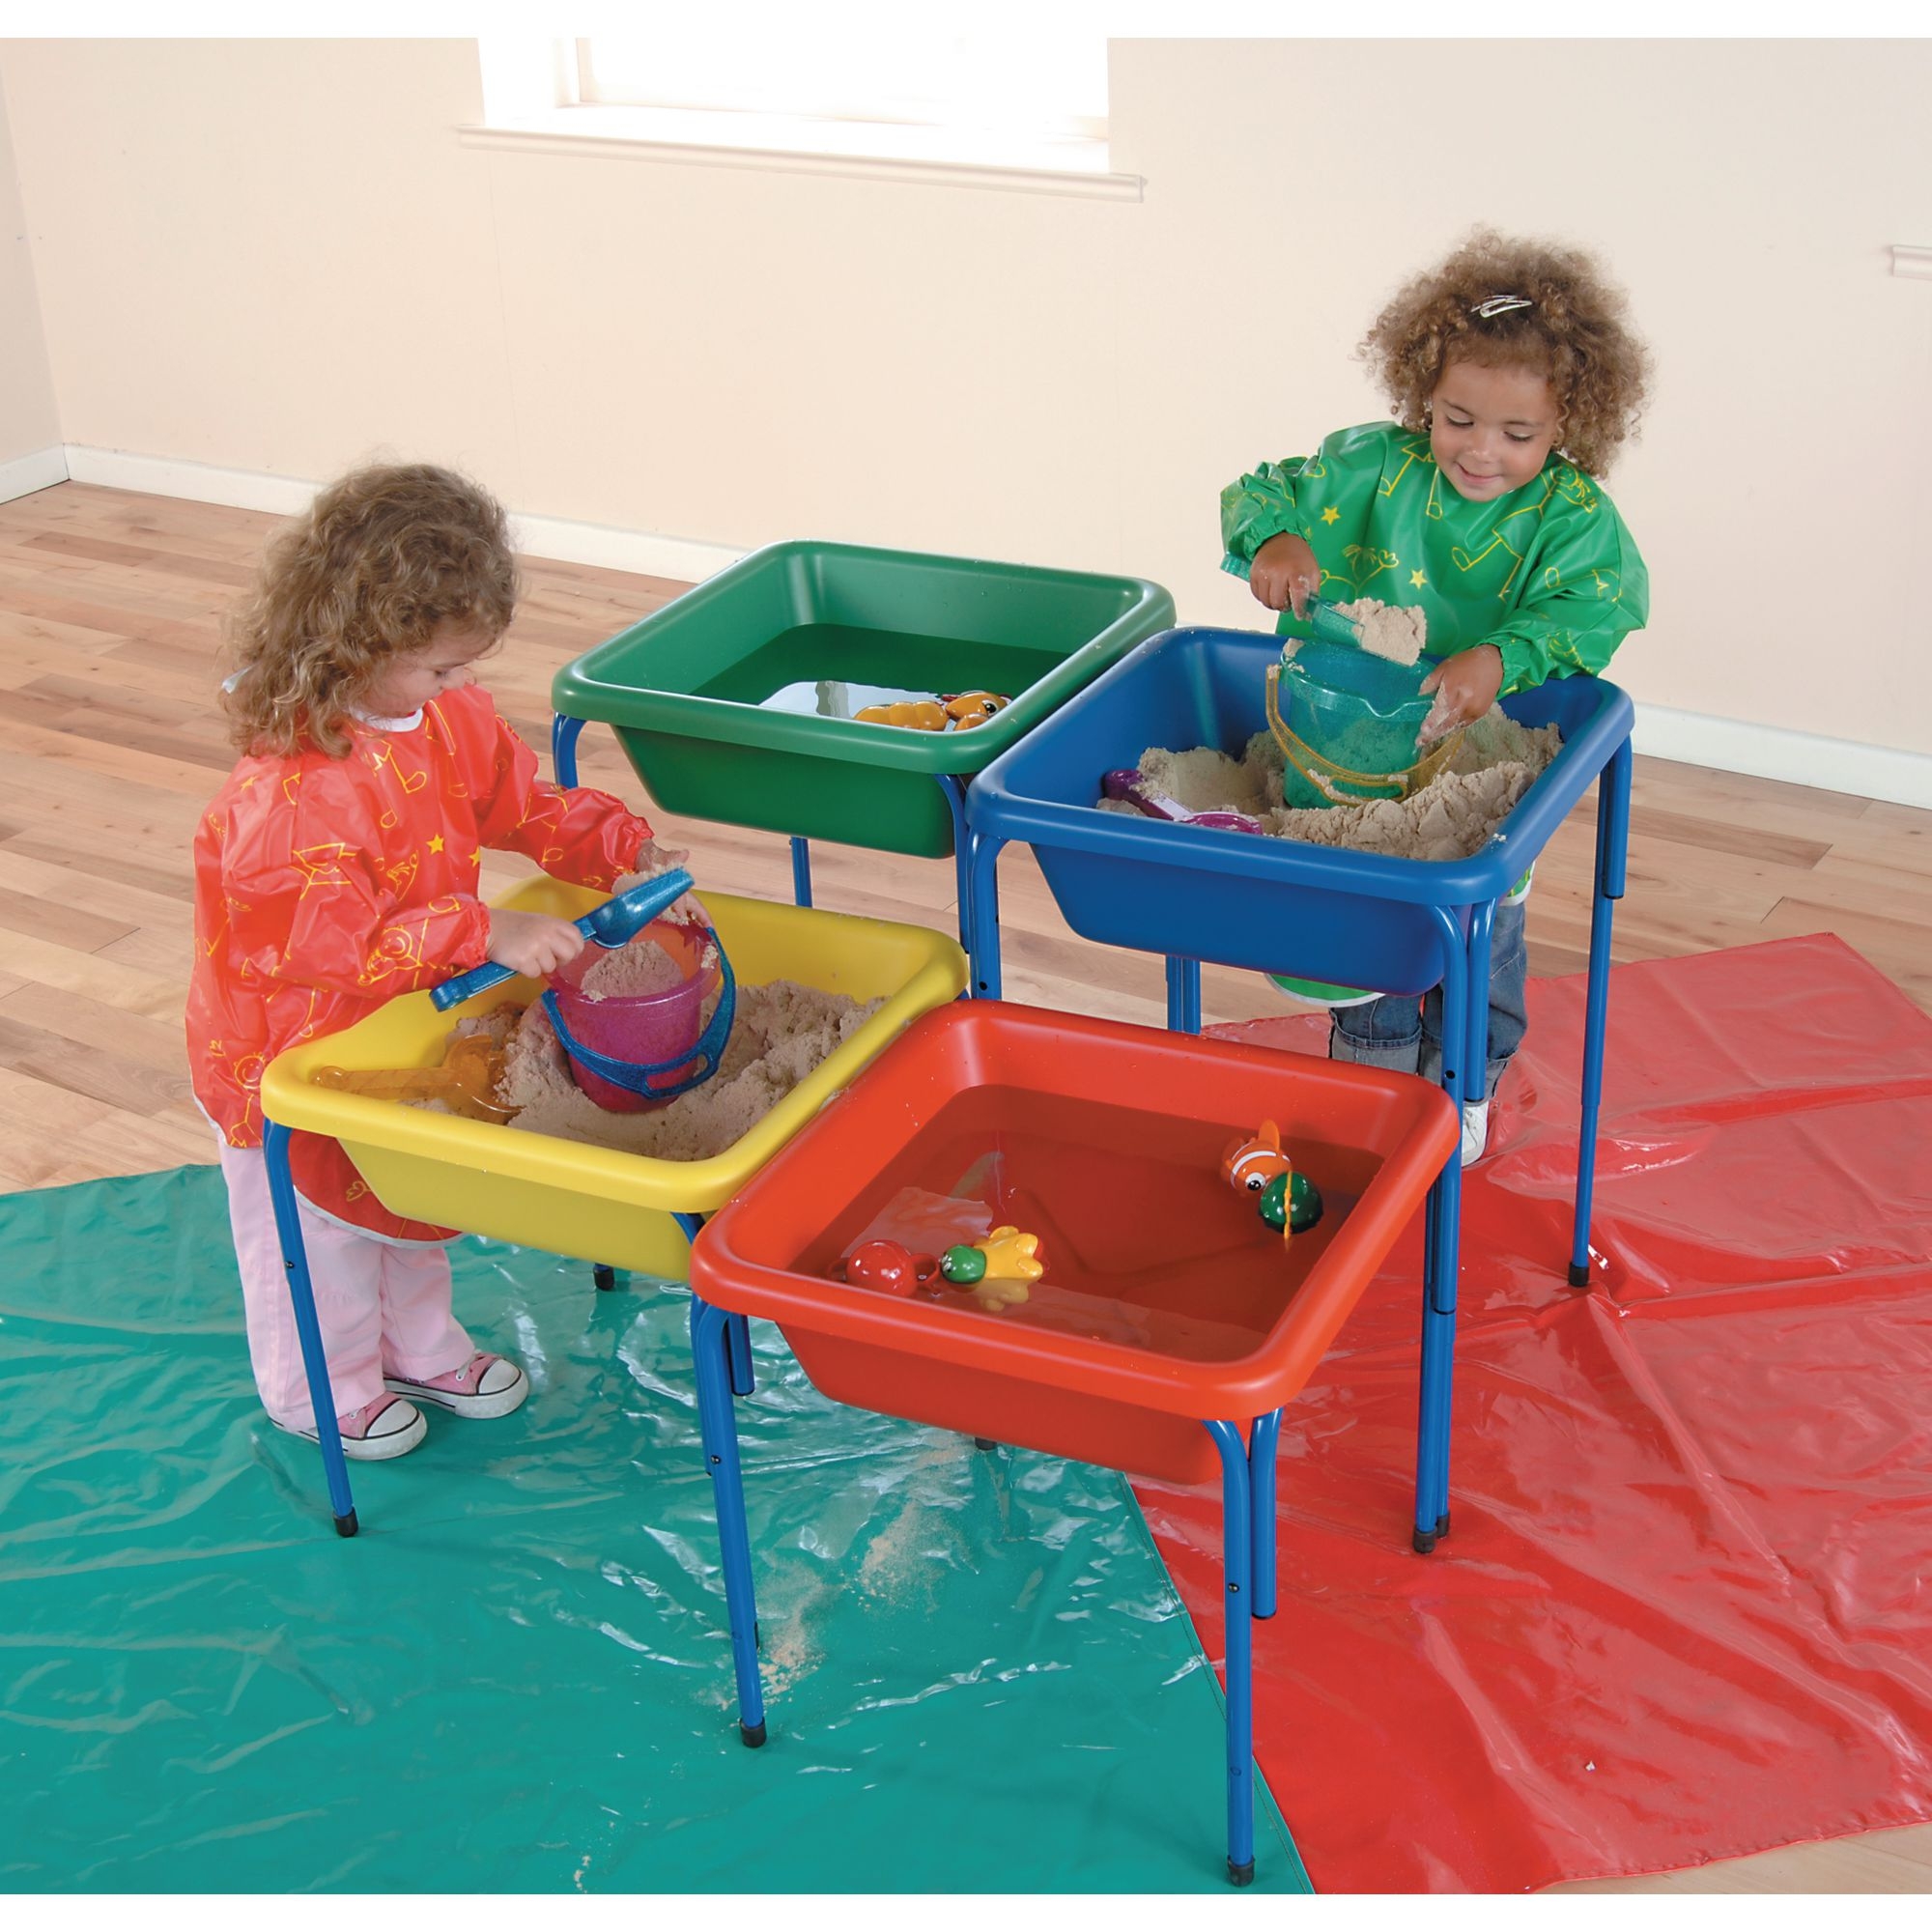 Adjustable Sand and Water Table Tub - Blue